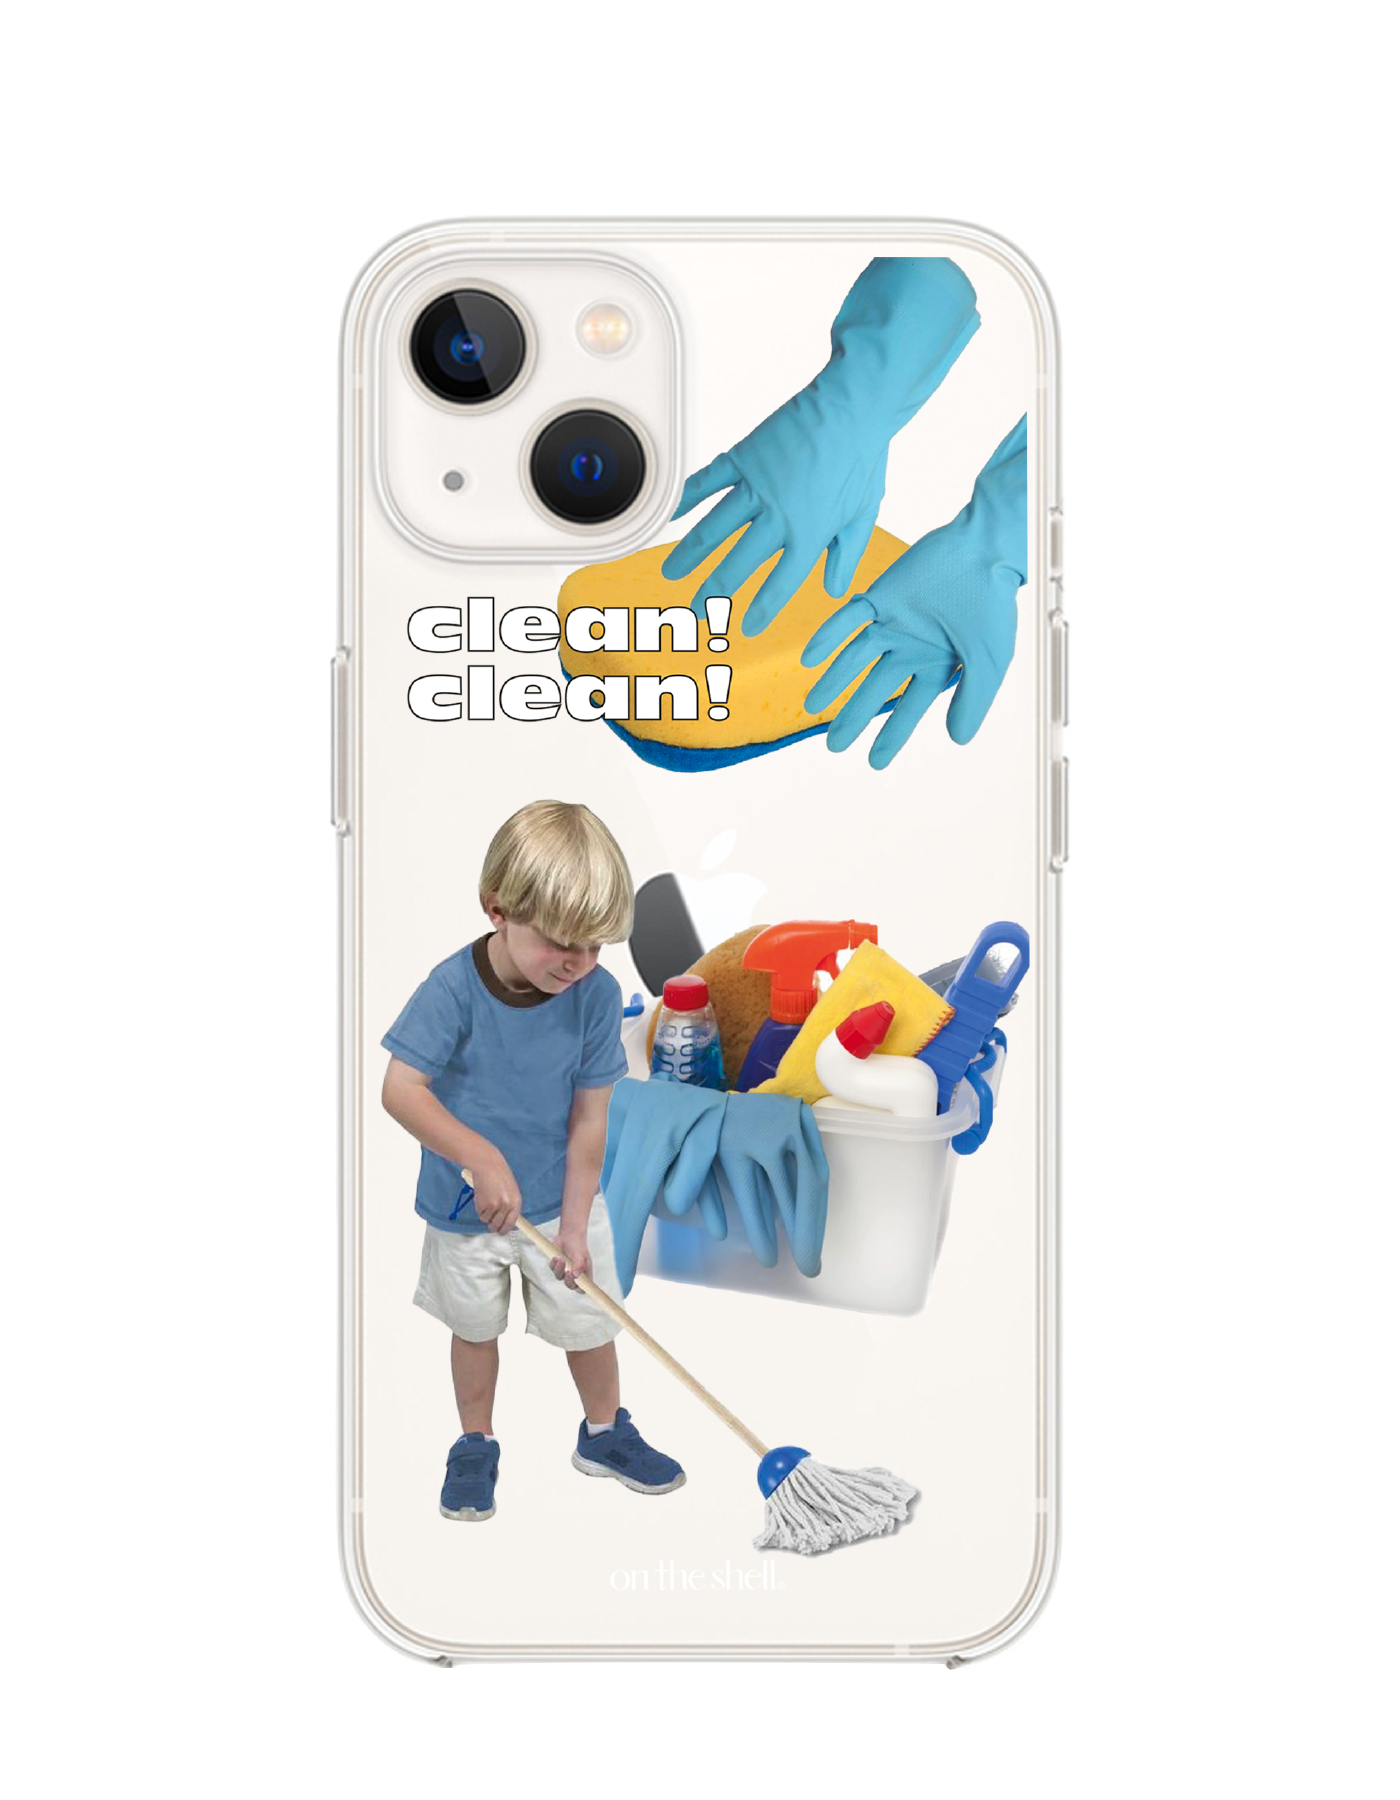 (Jell hard) Clean and clean Iphone case